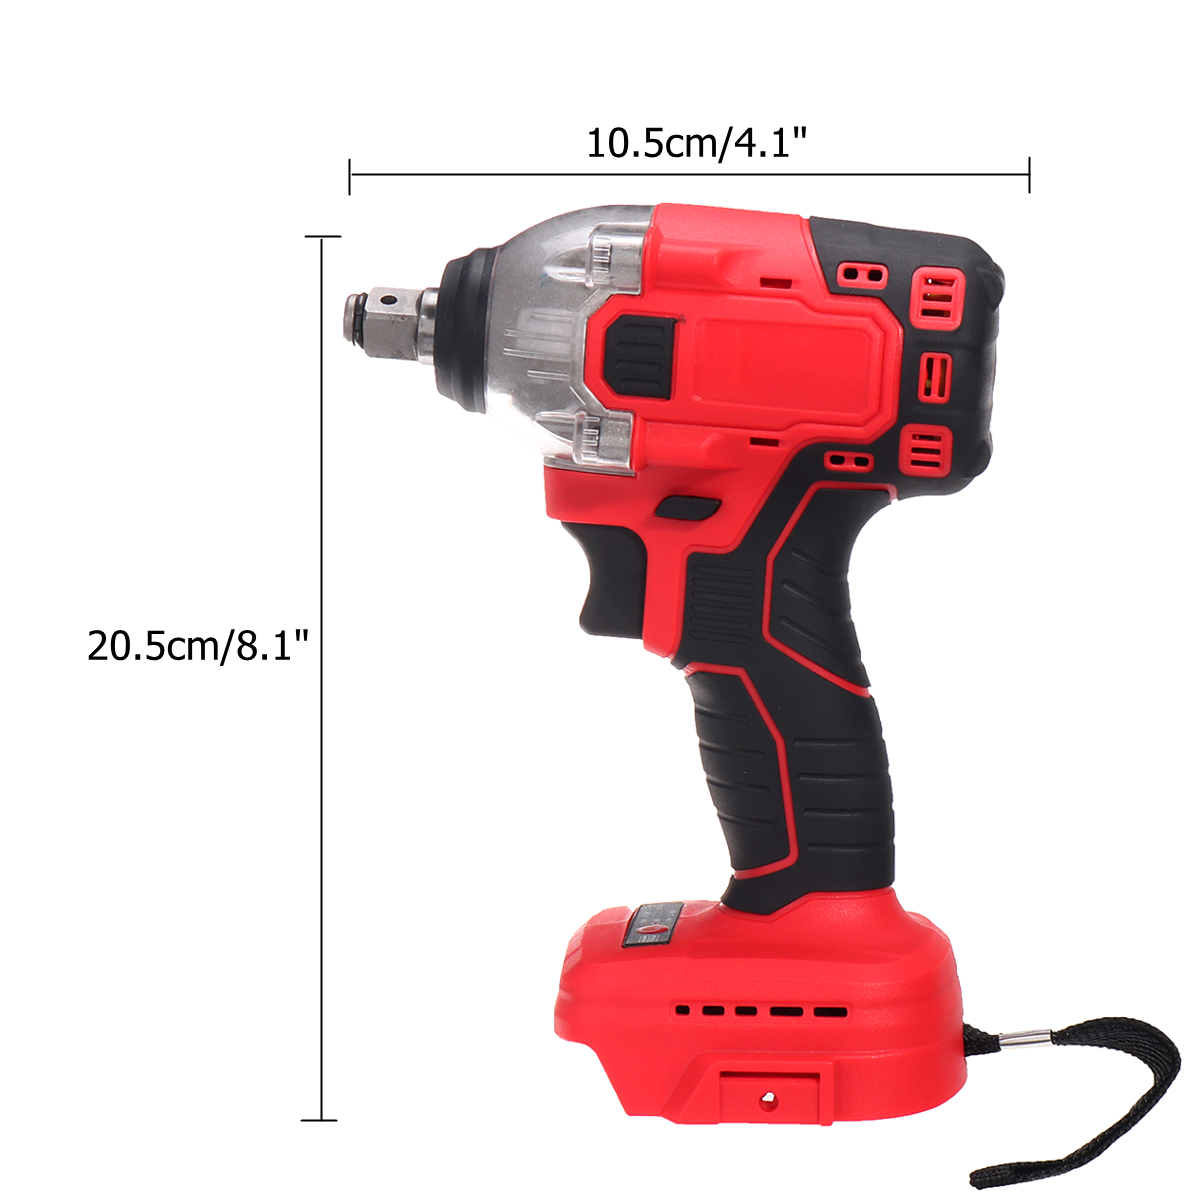 520Nm-12-Cordless-Brushless-Impact-Wrench-Power-Driver-Electric-Wrench-For-Makita-18V-Battery-1749248-11